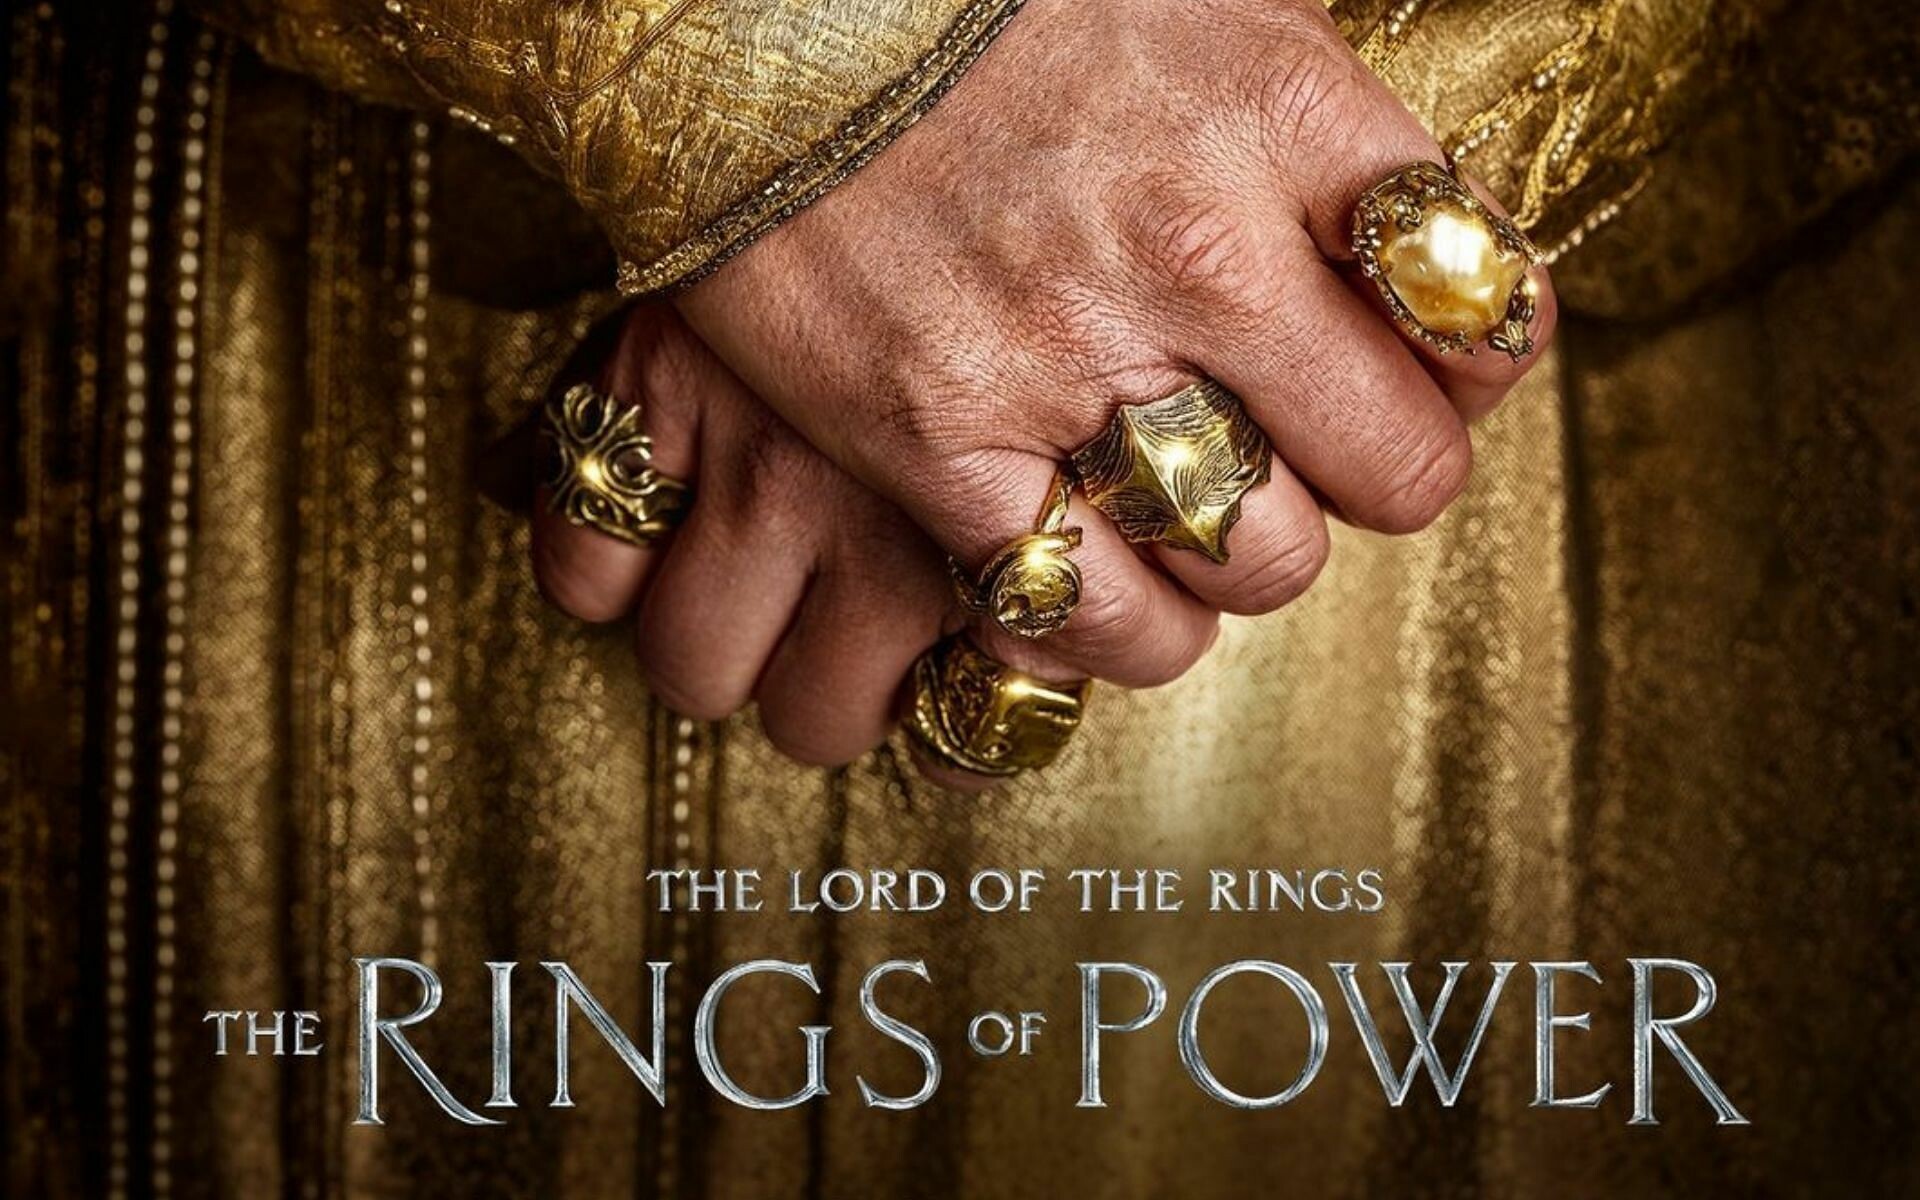 The Lord of the Rings, The Rings of Power, Budget, Trailer release date, 1920x1200 HD Desktop